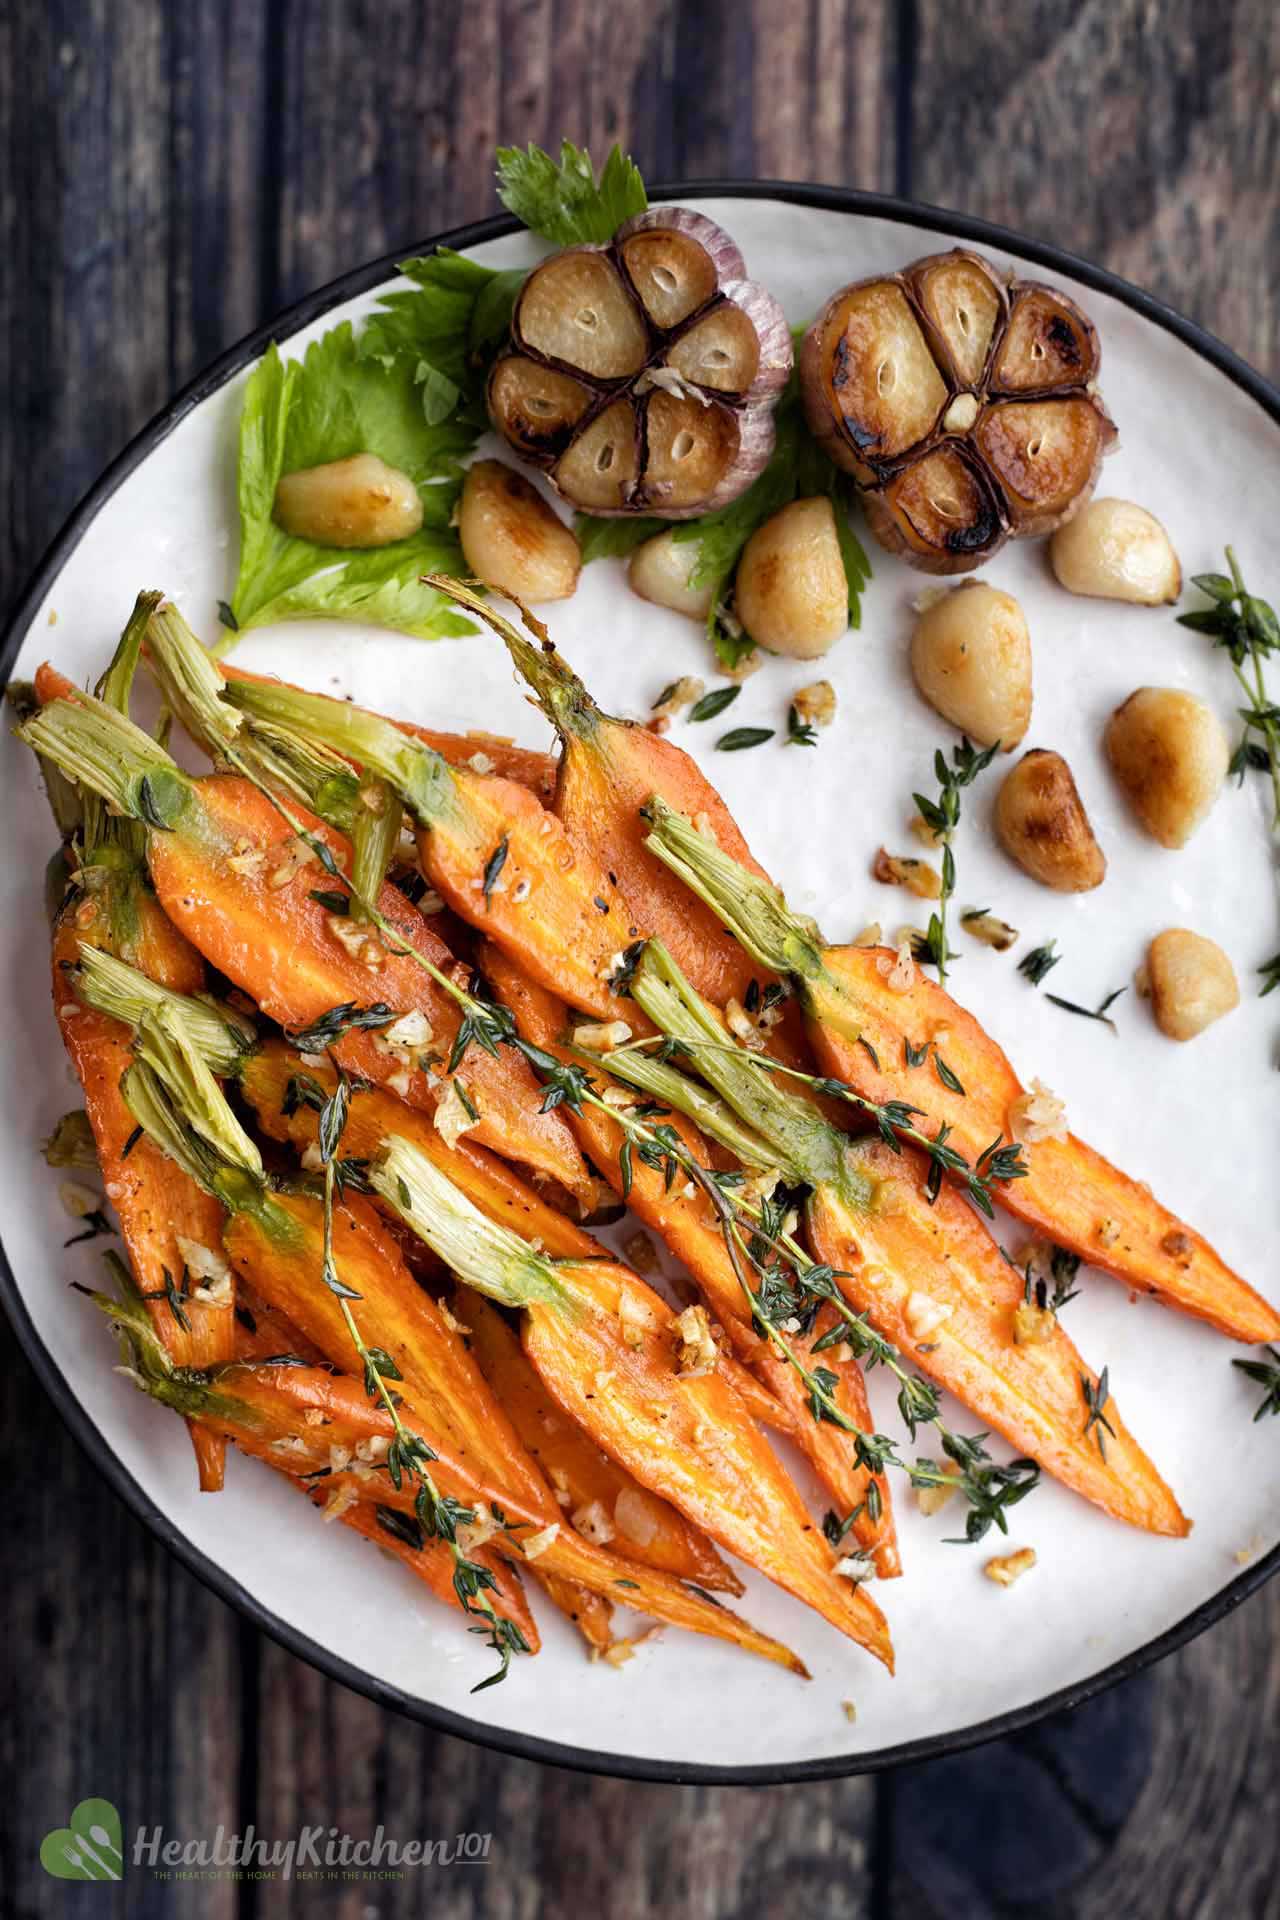 Roasted Carrot Recipe - A Simple Low-carb Side Dish Made Easy